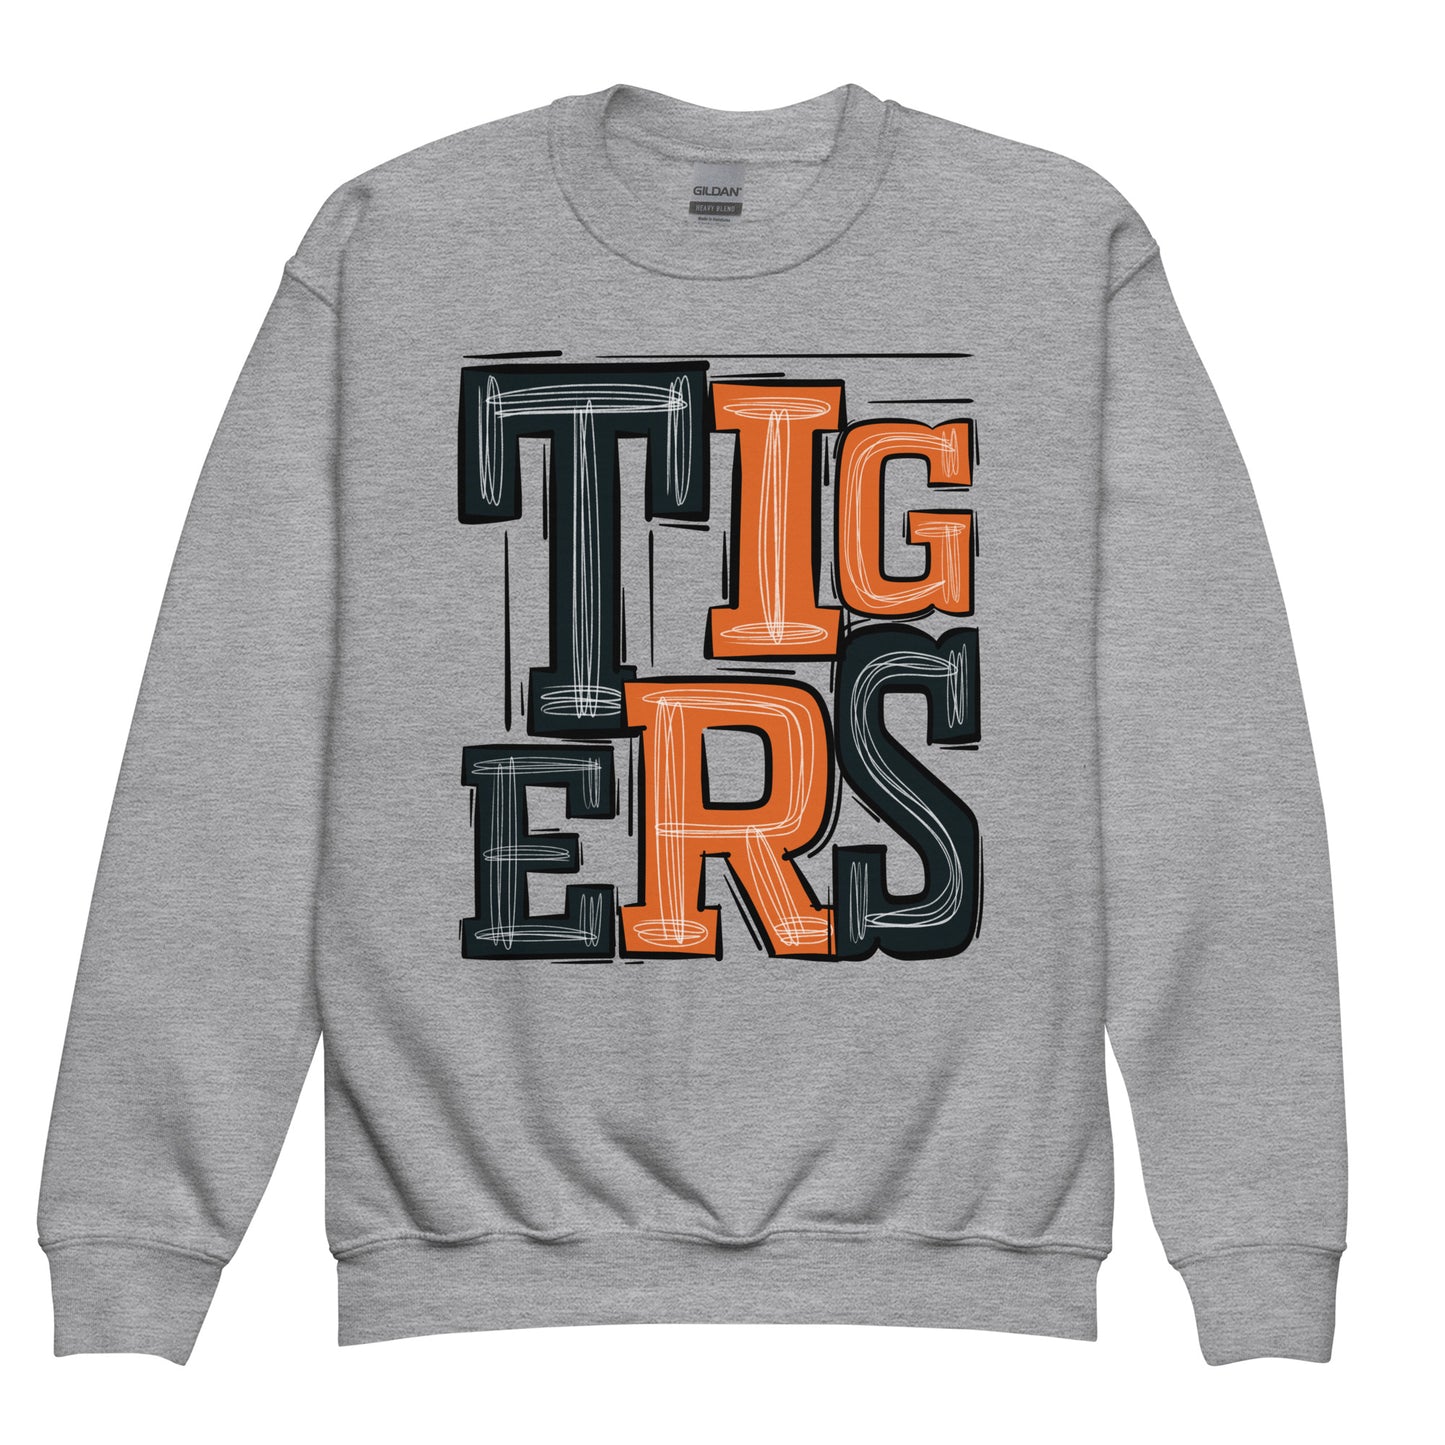 YOUTH Tigers hand lettered sweatshirt